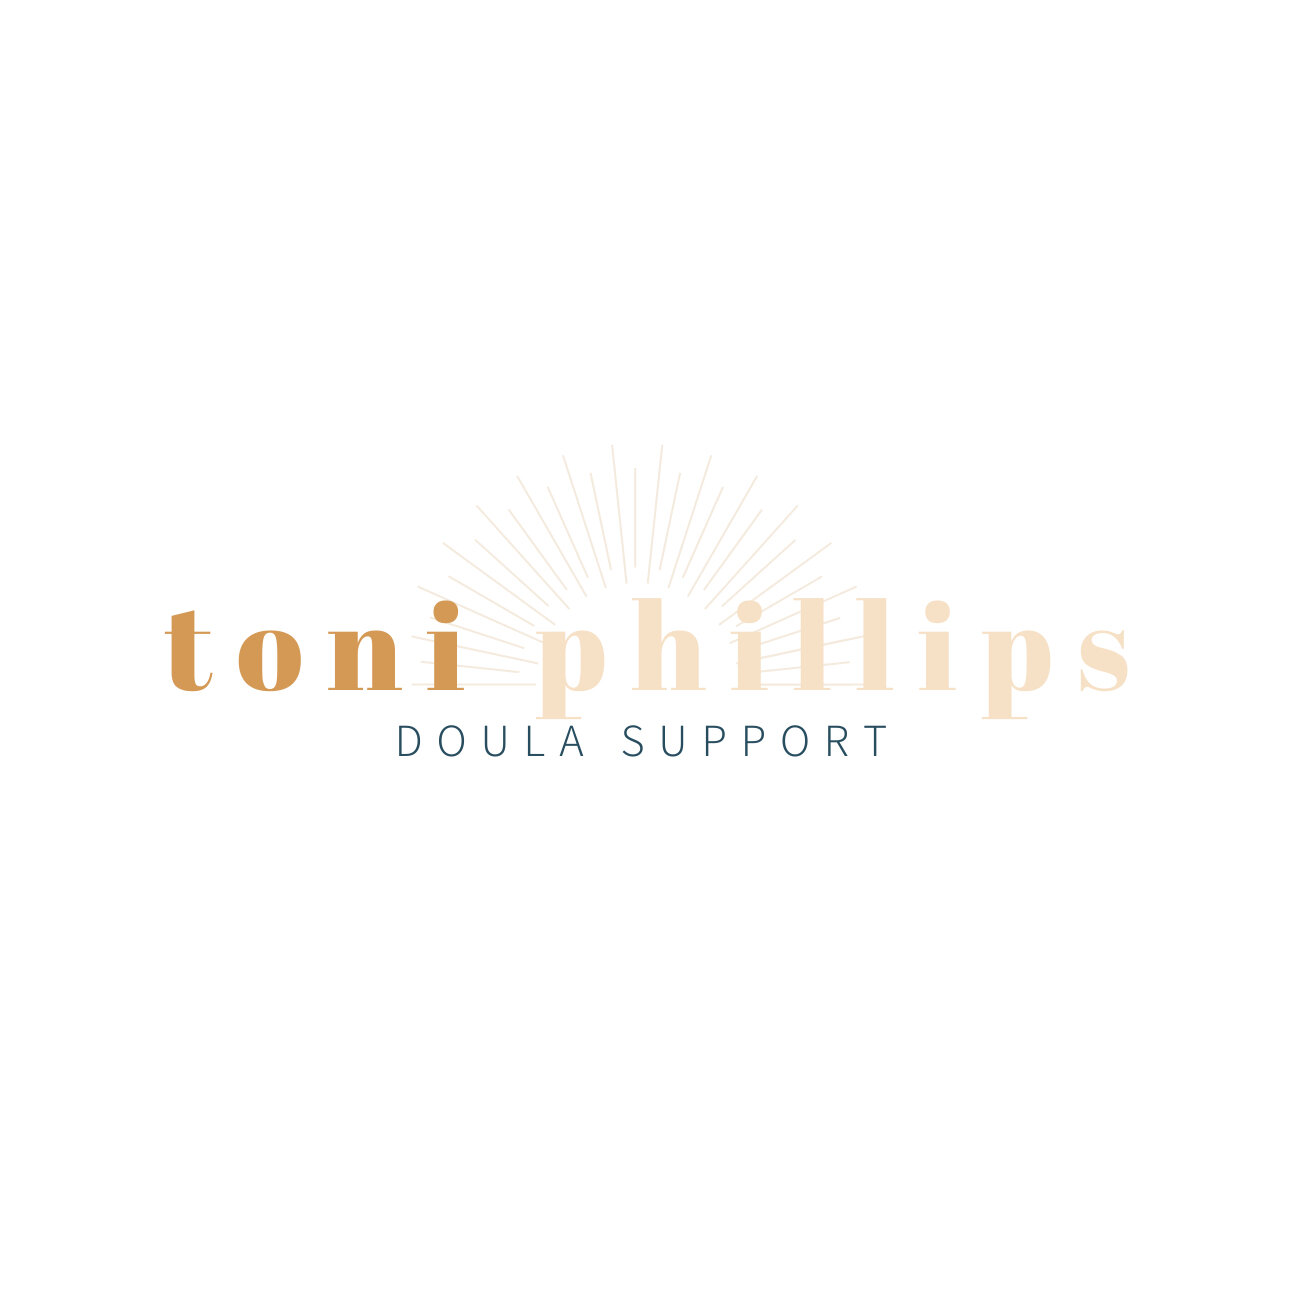 Toni Phillips Doula Support